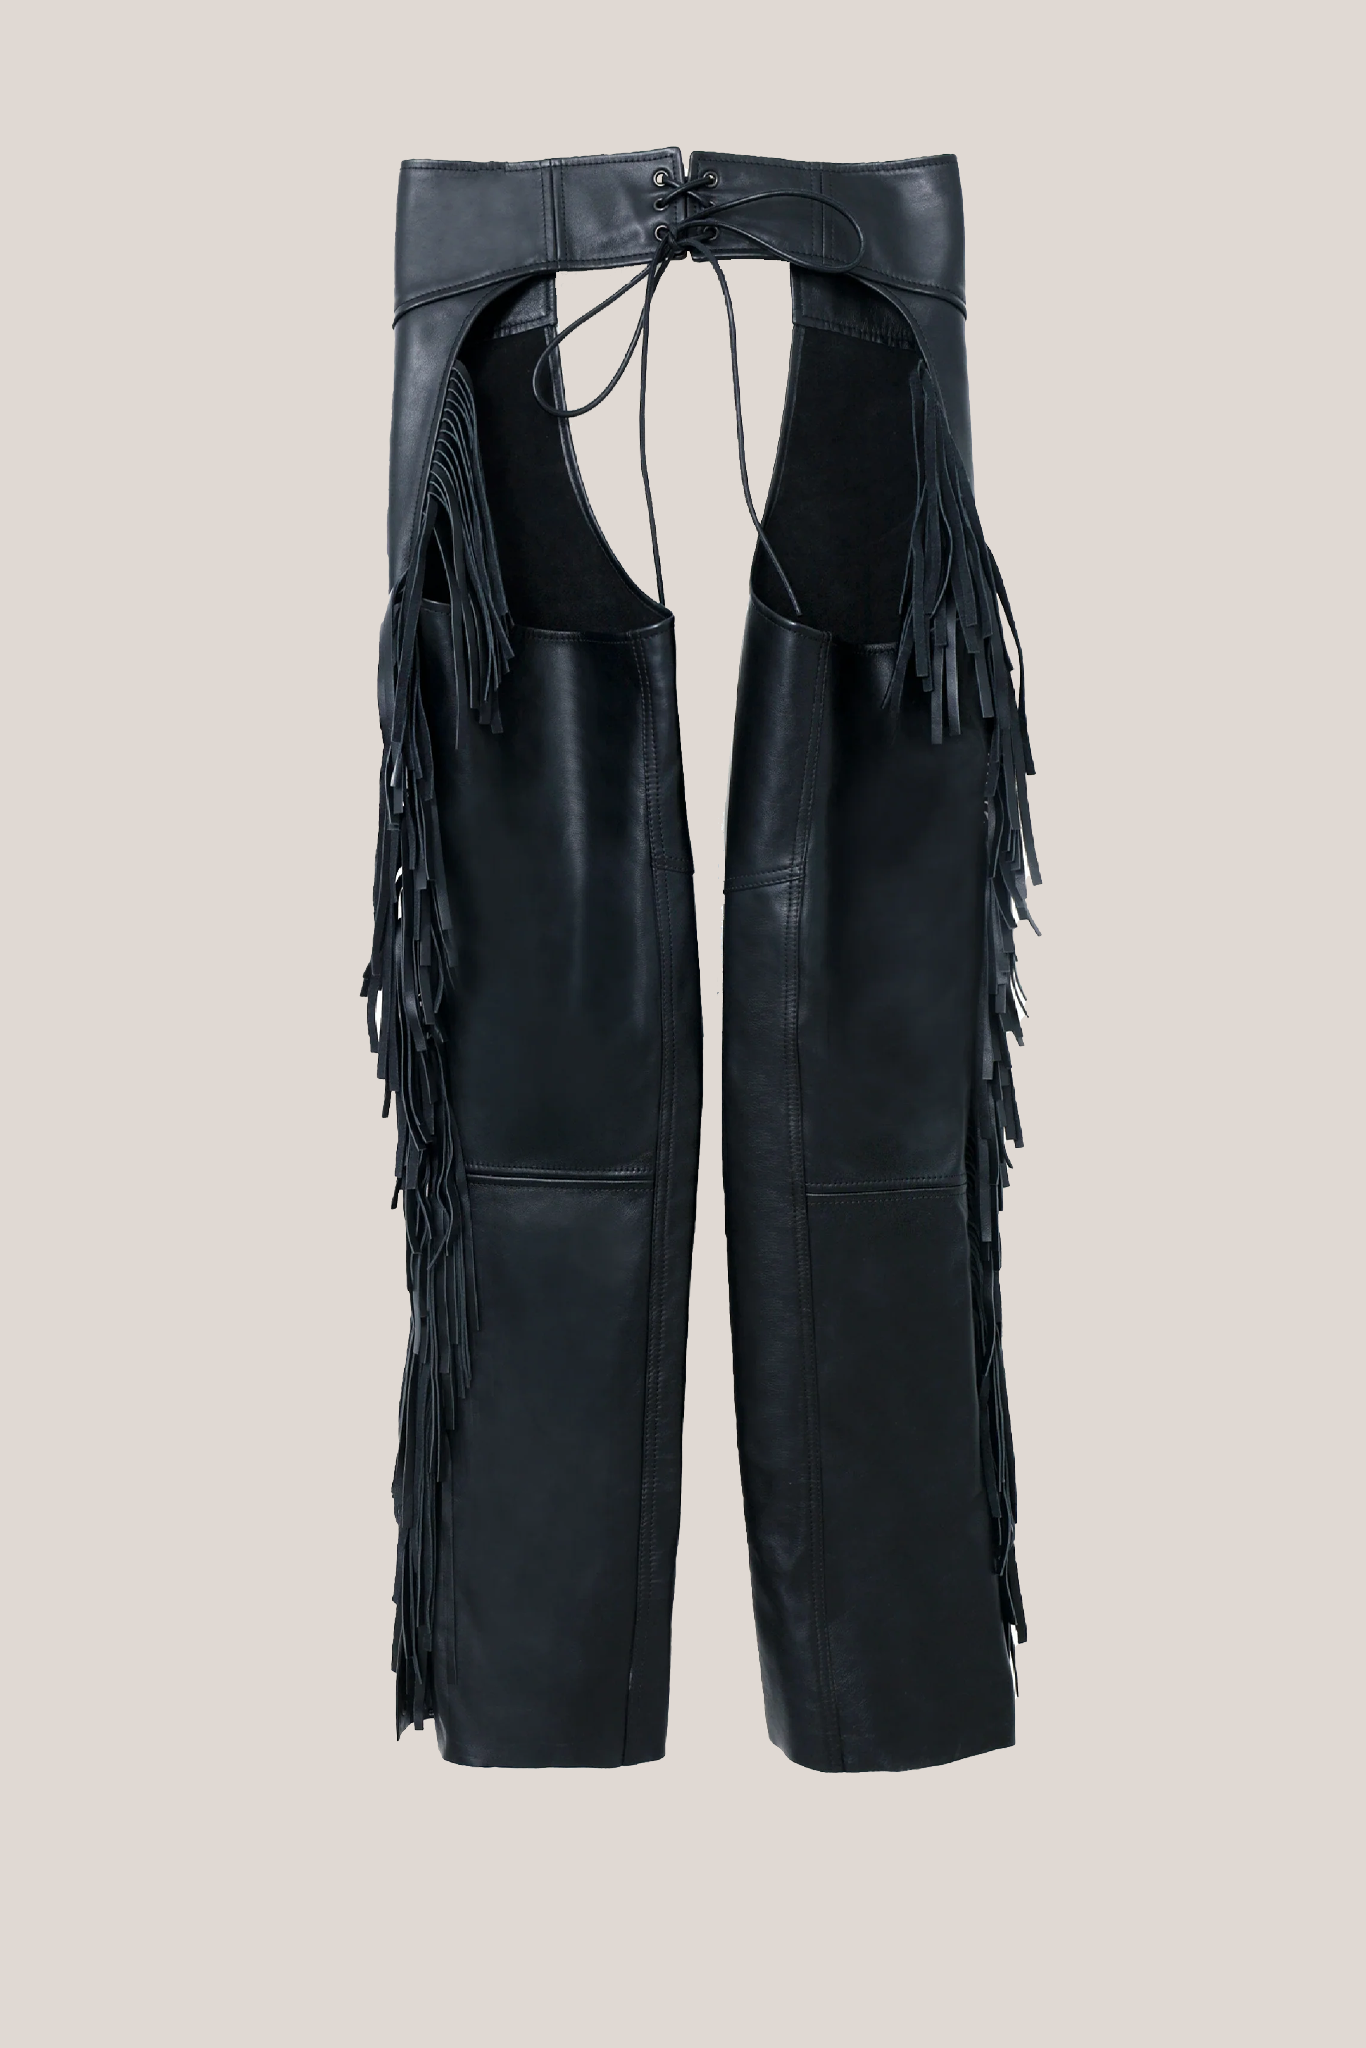 Open Leather Chaps